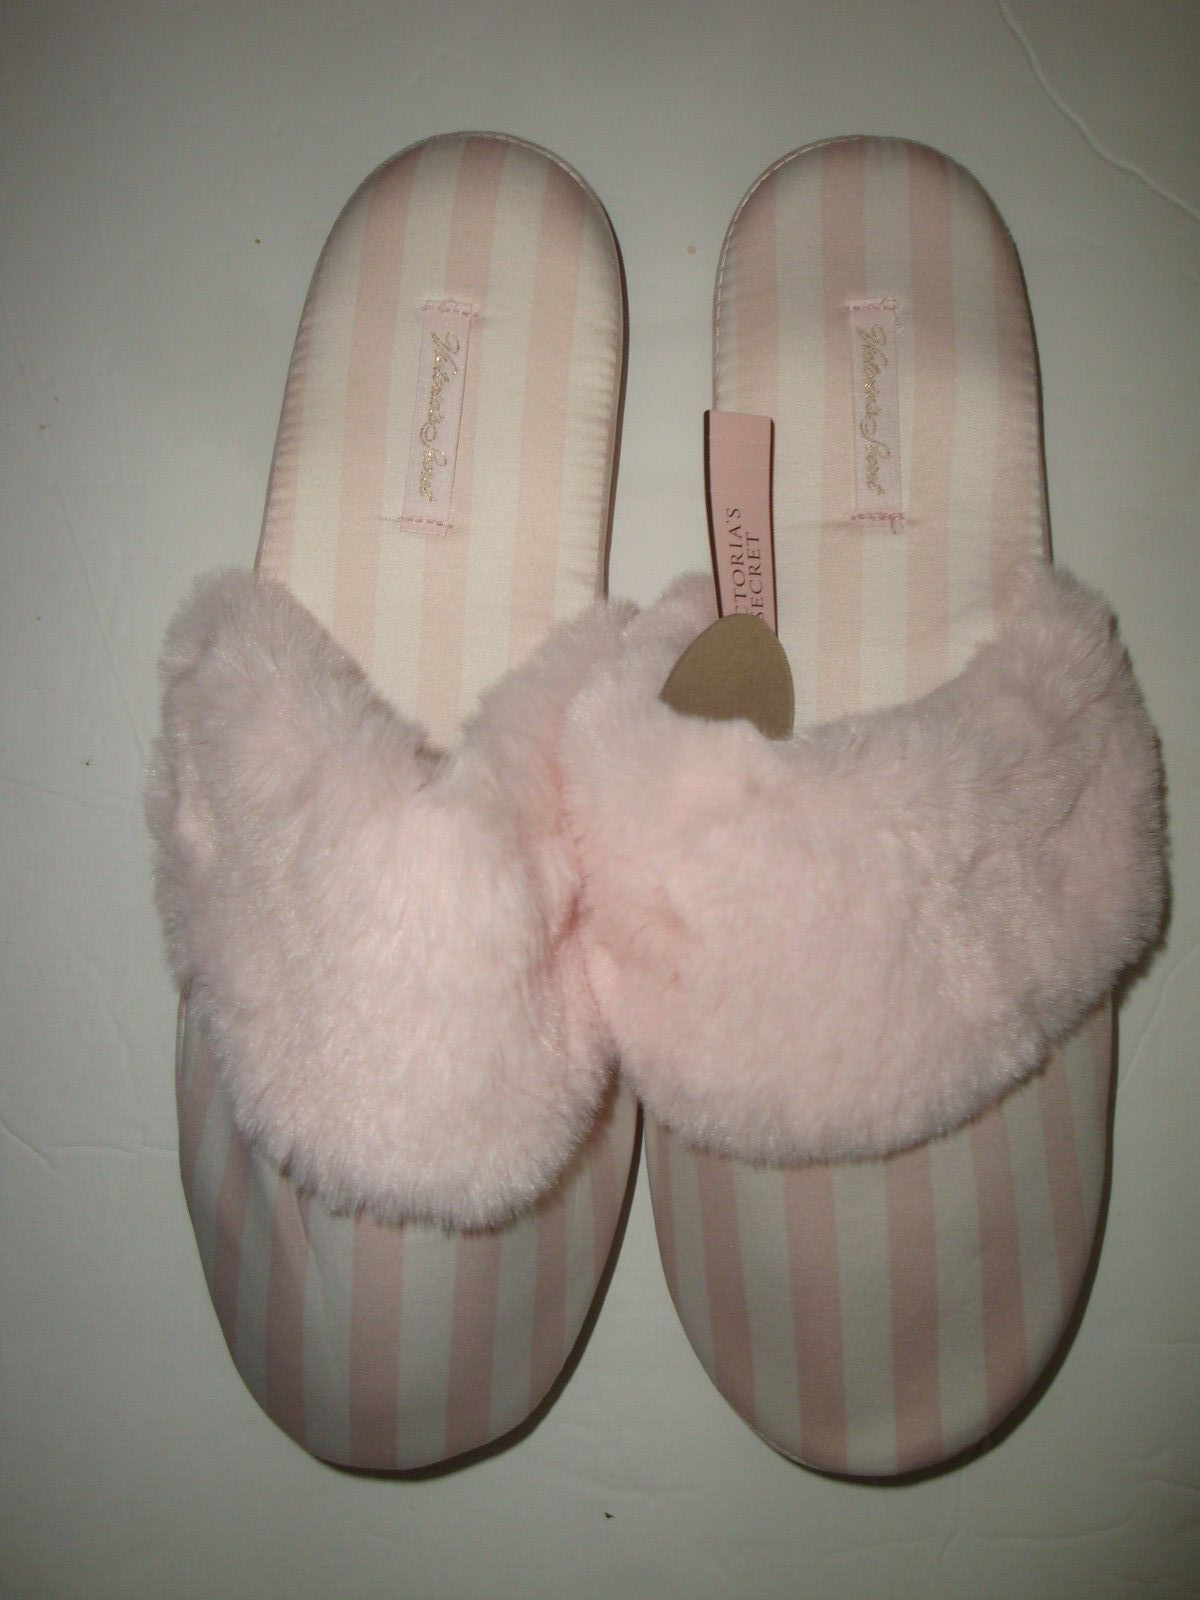 Primary image for New Victoria's Secret Classic White/Pink Stripe Satin/Faux Fur Slippers S 5/6